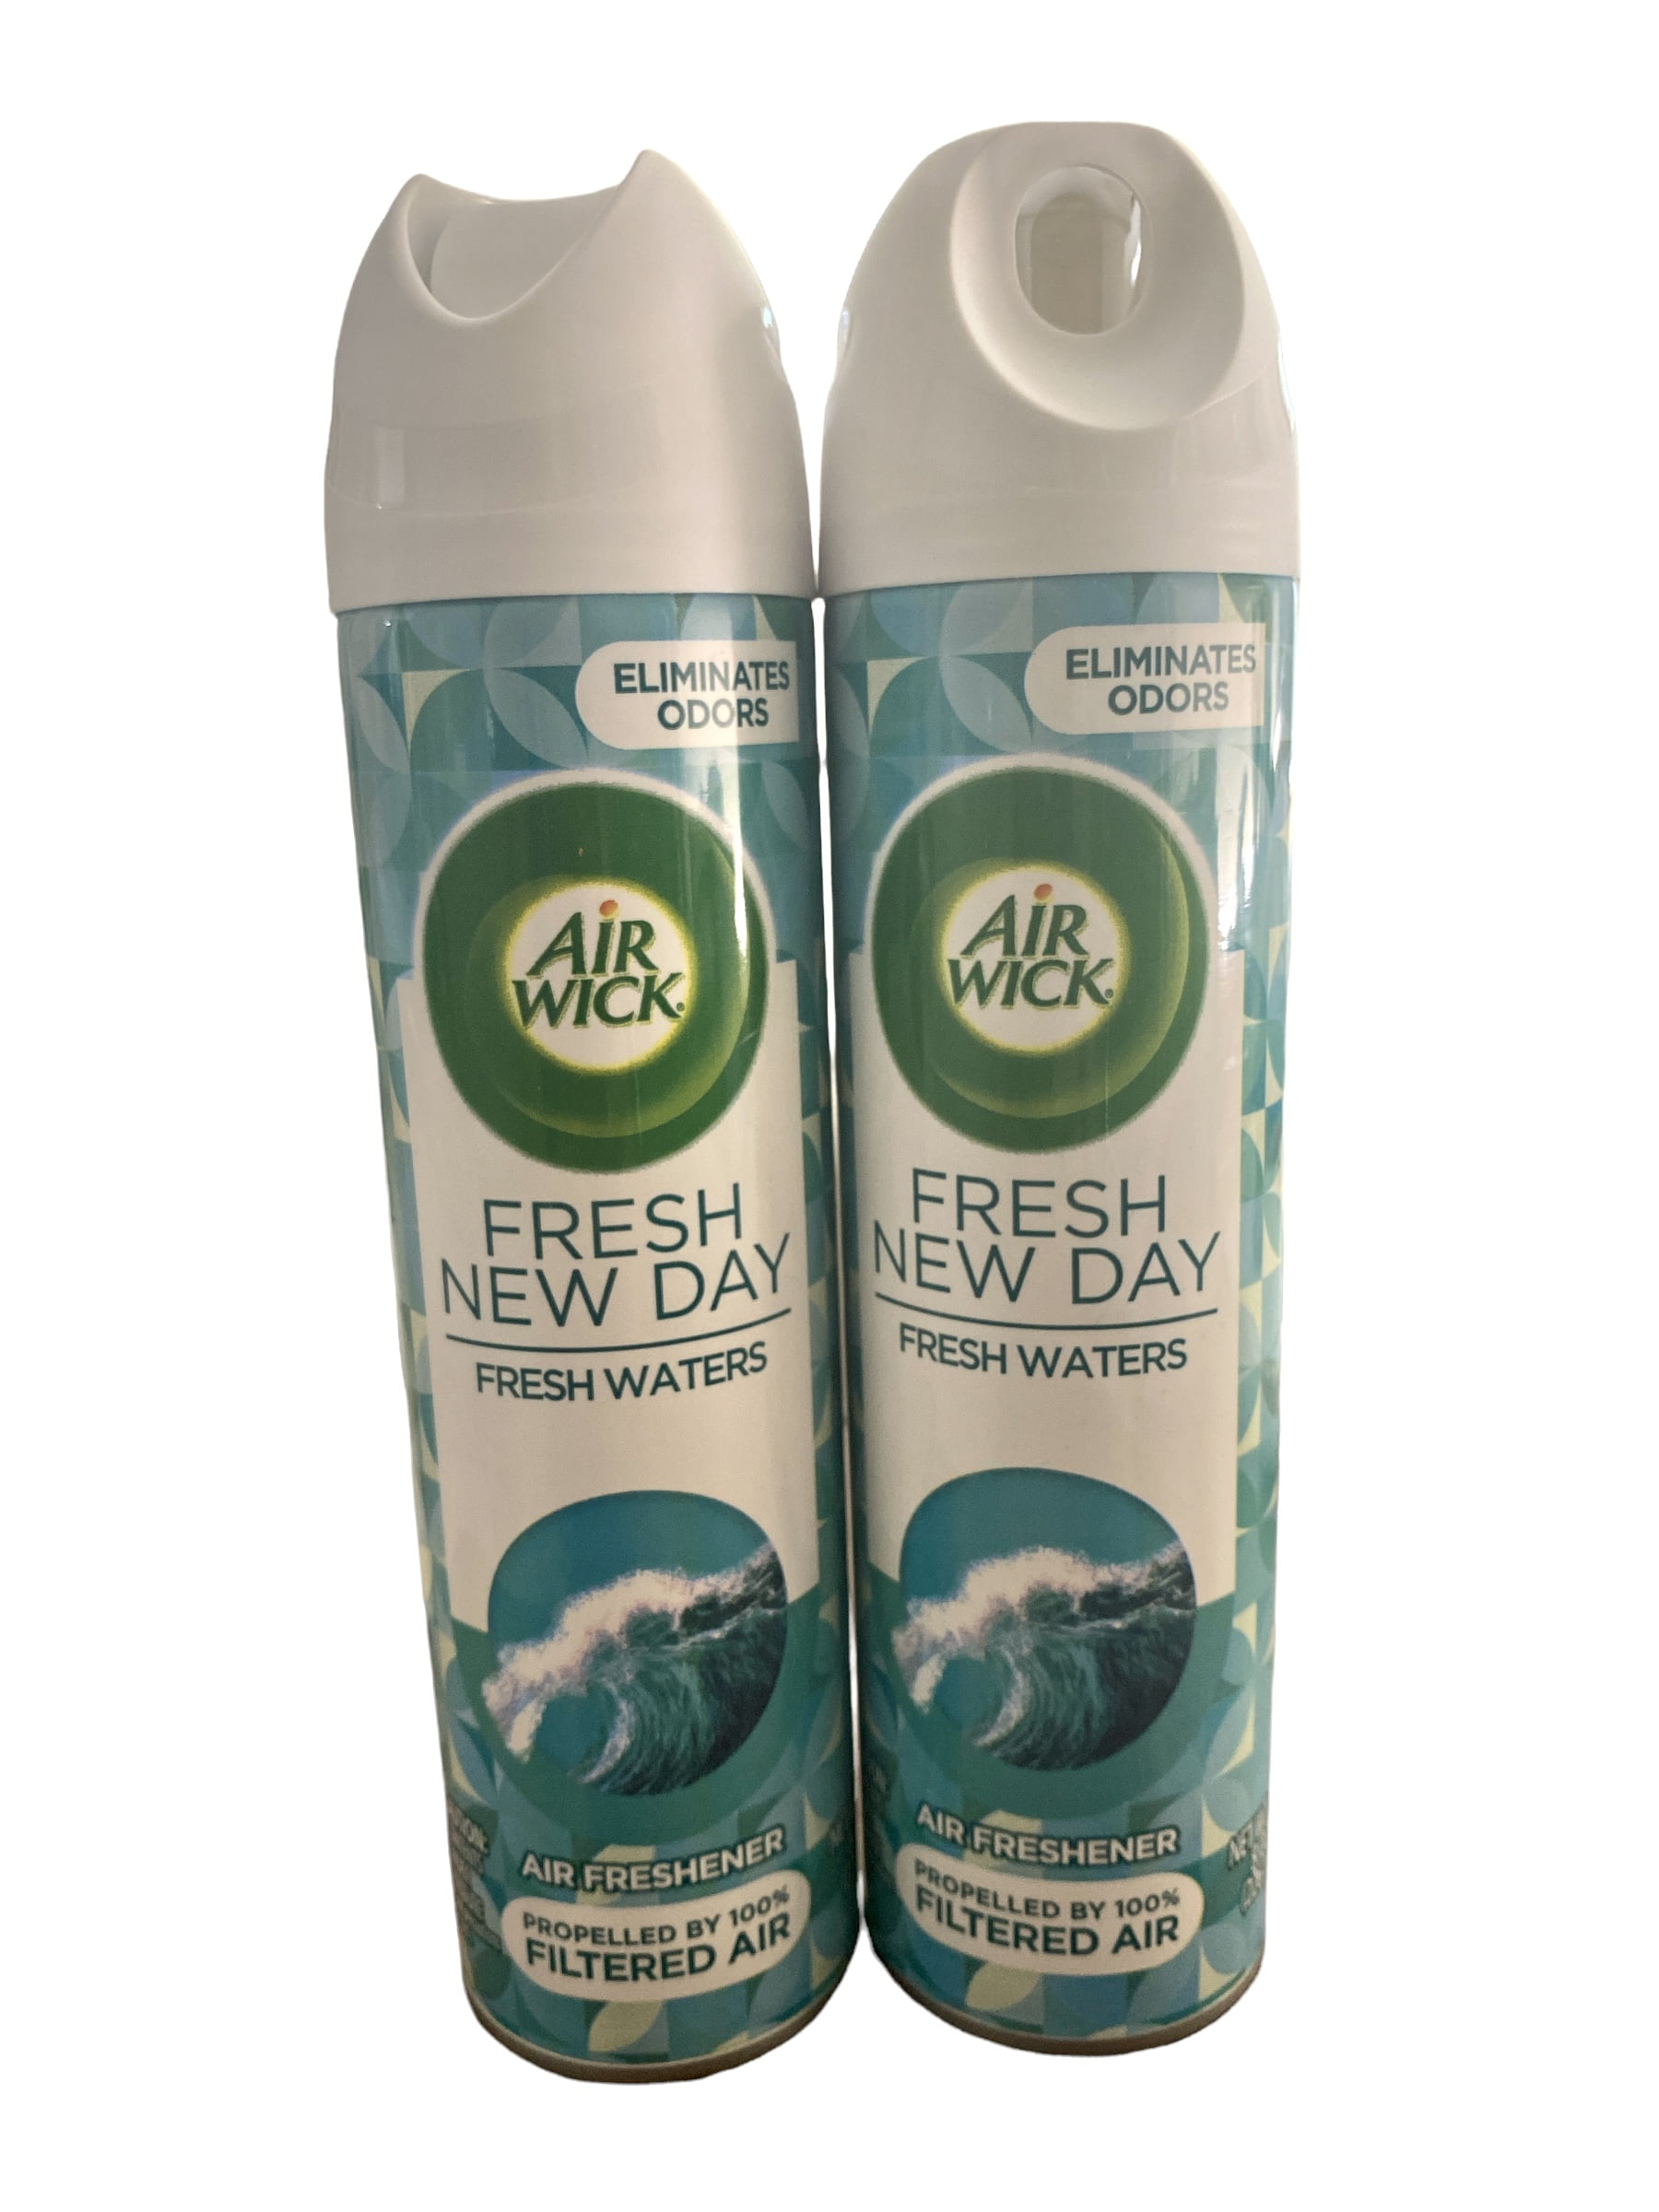 Air Wick Fresh new Day Eliminates odors Air freshener Fresh Waters  Propelled by 100 % Filtered air 8oz each 2 Pack 